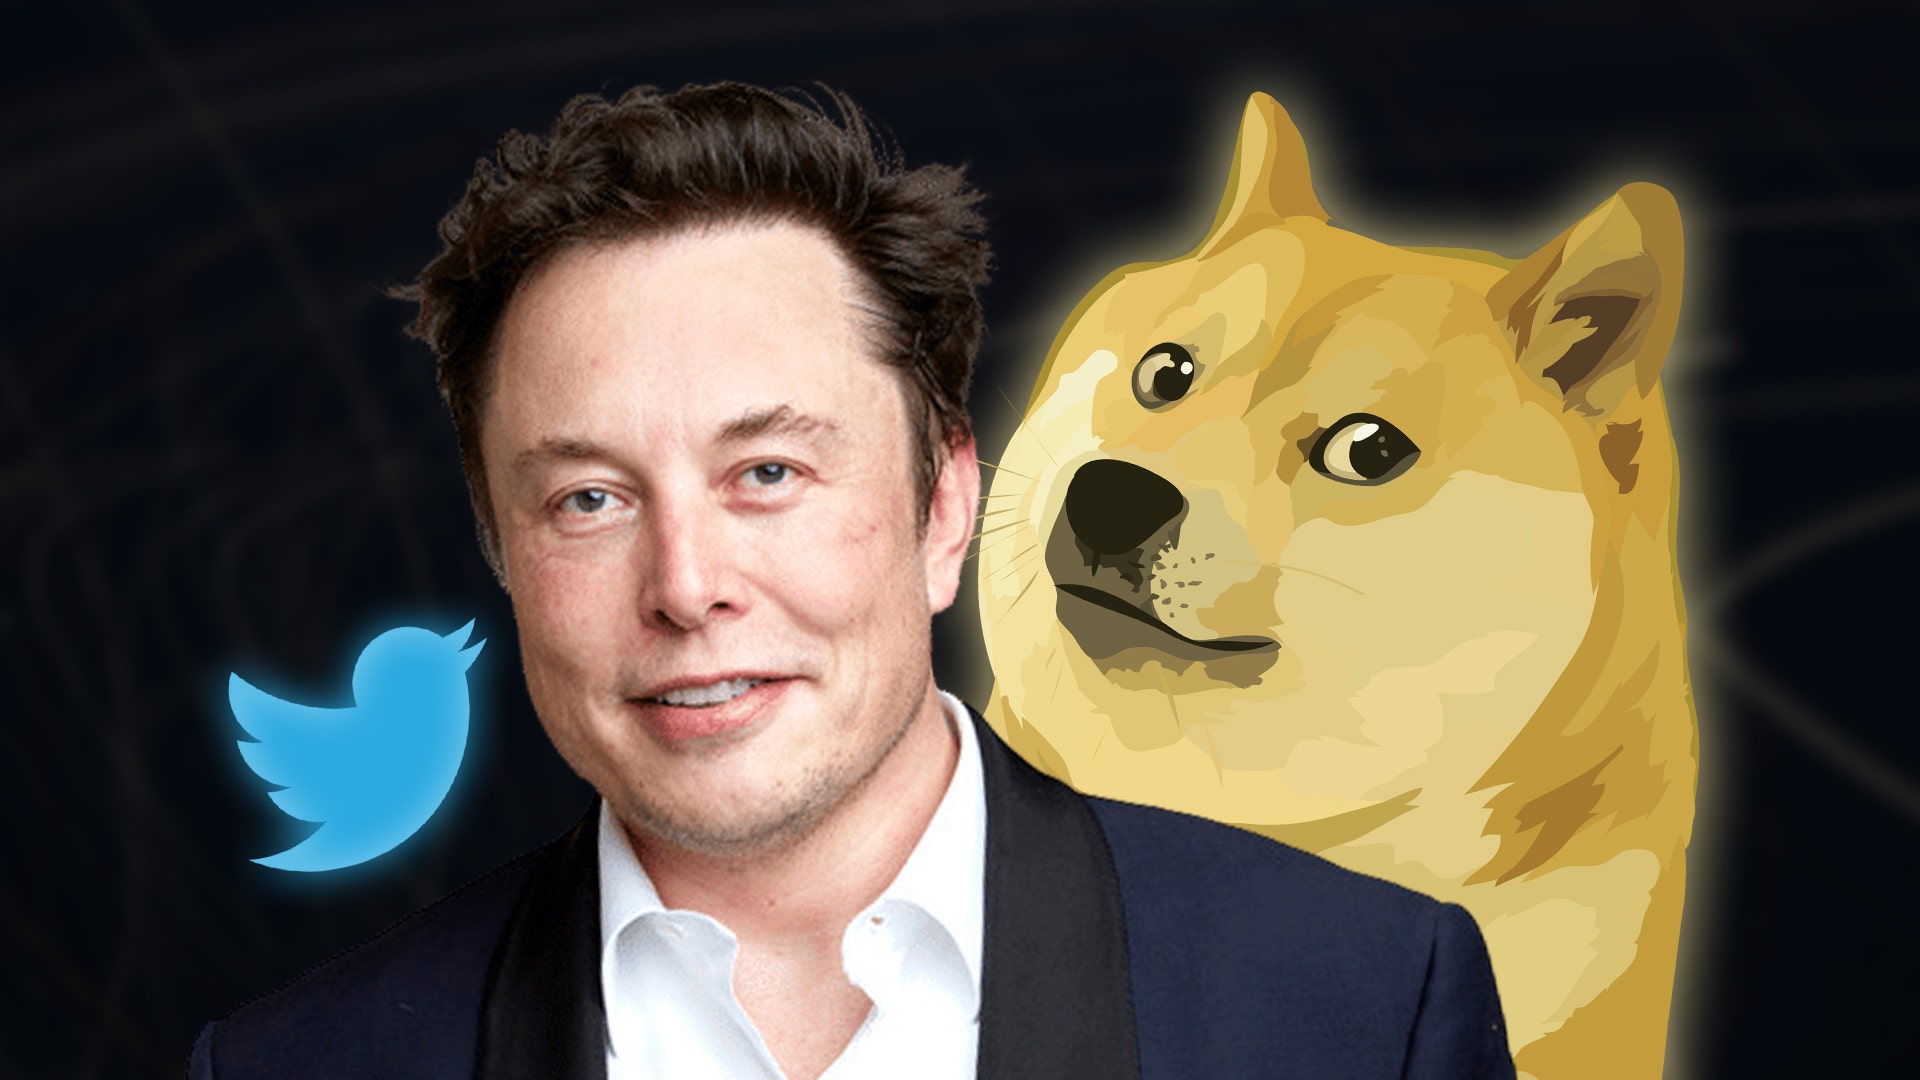 Dogecoin Reduces Carbon Footprint Drastically In 2022 After Elon Musk's 'Working With Doge Devs' Comment